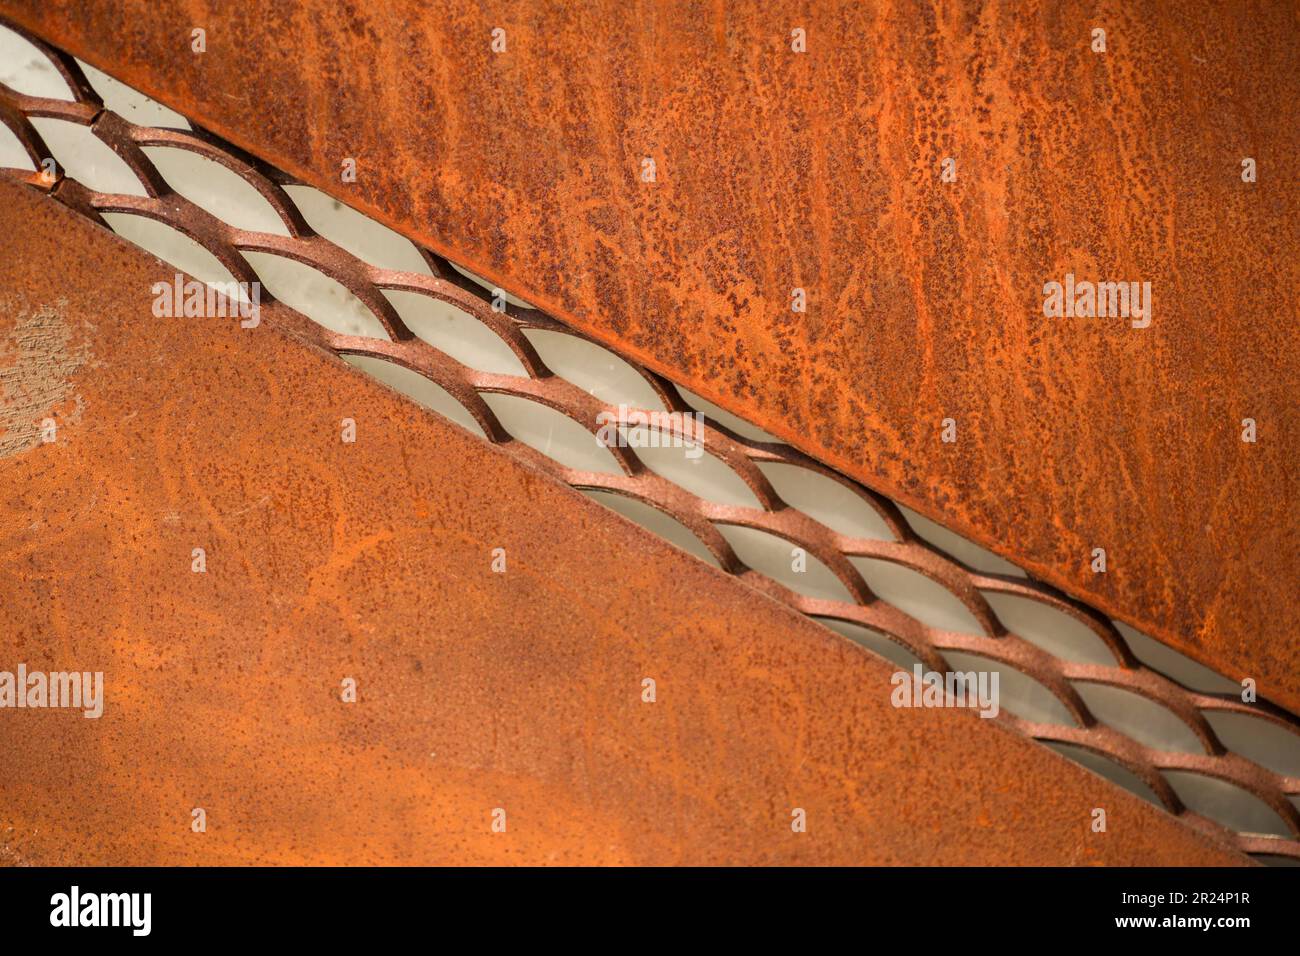 rusty metal surface close up, with glass in the middle Stock Photo